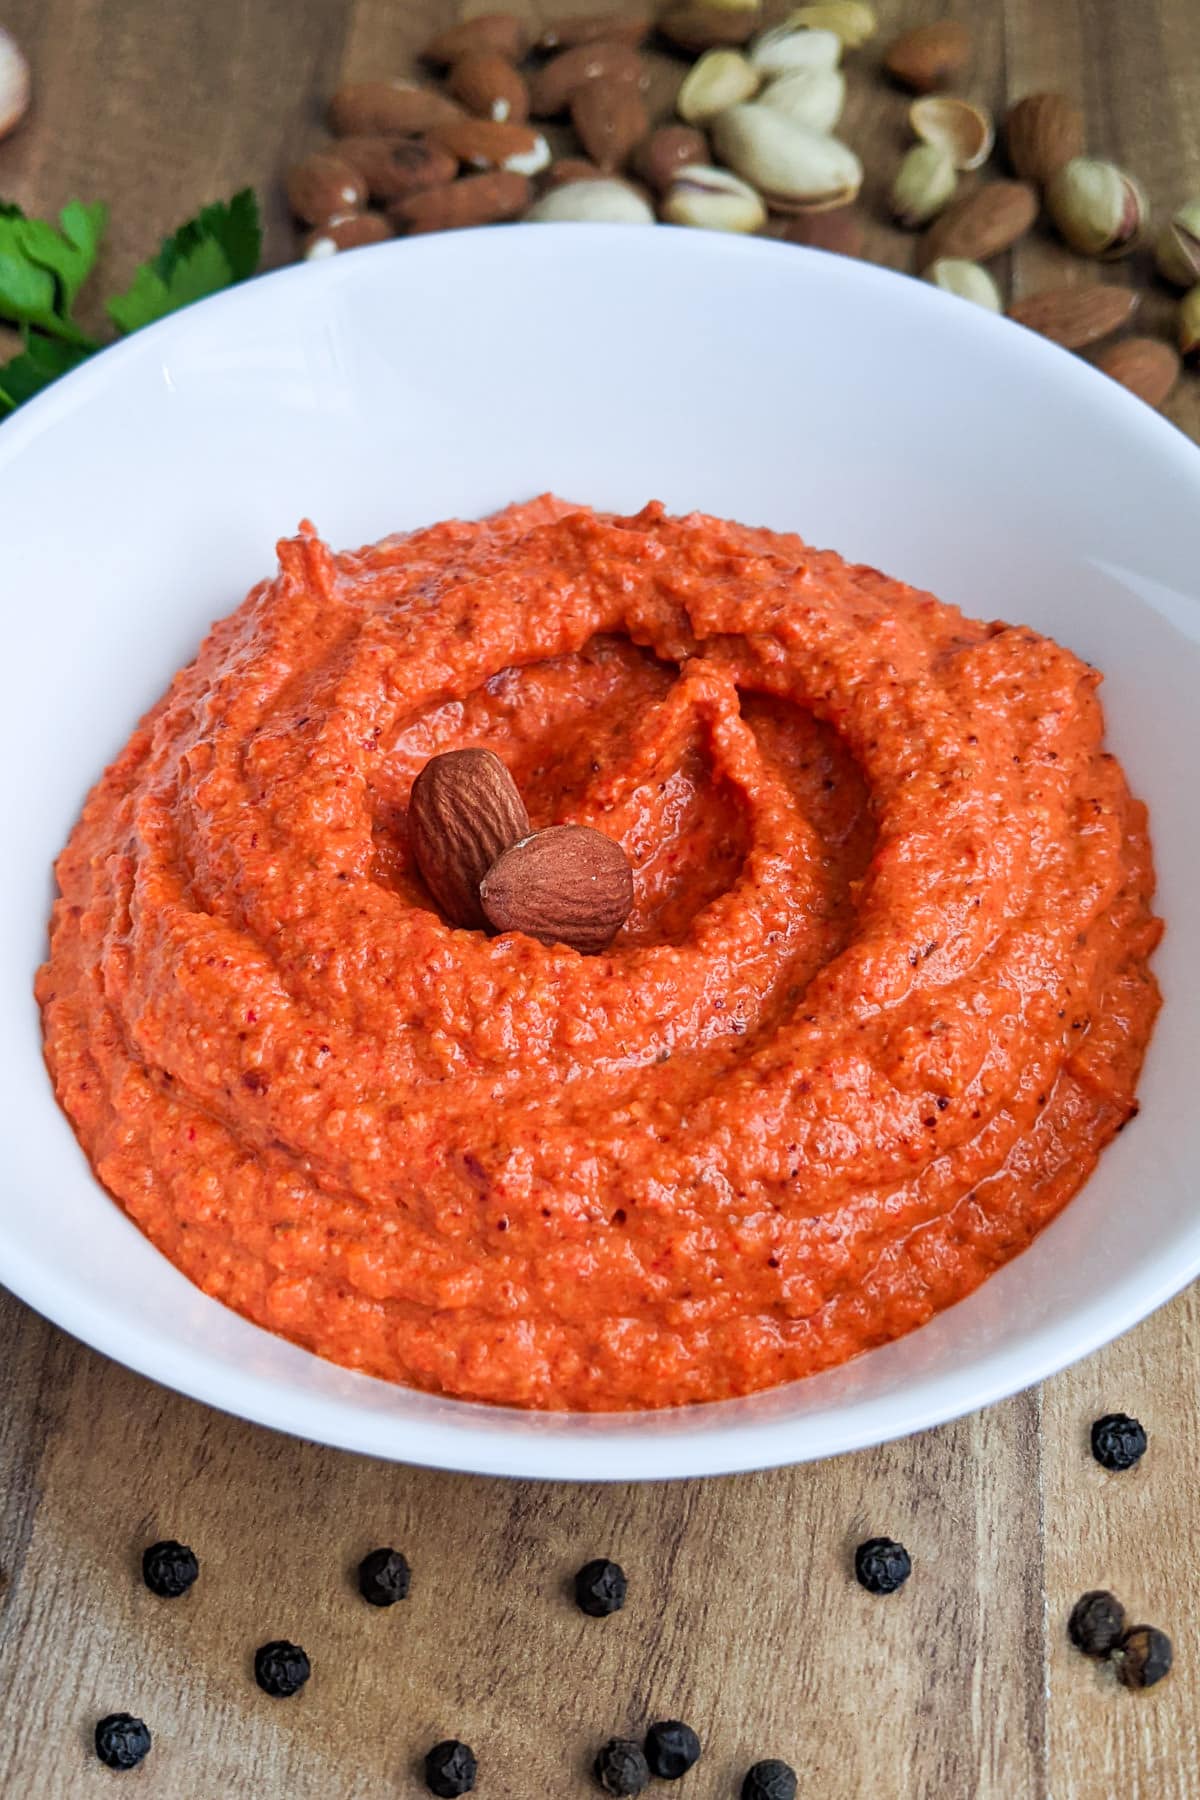 Romesco Sauce with almonds and black pepper on background.